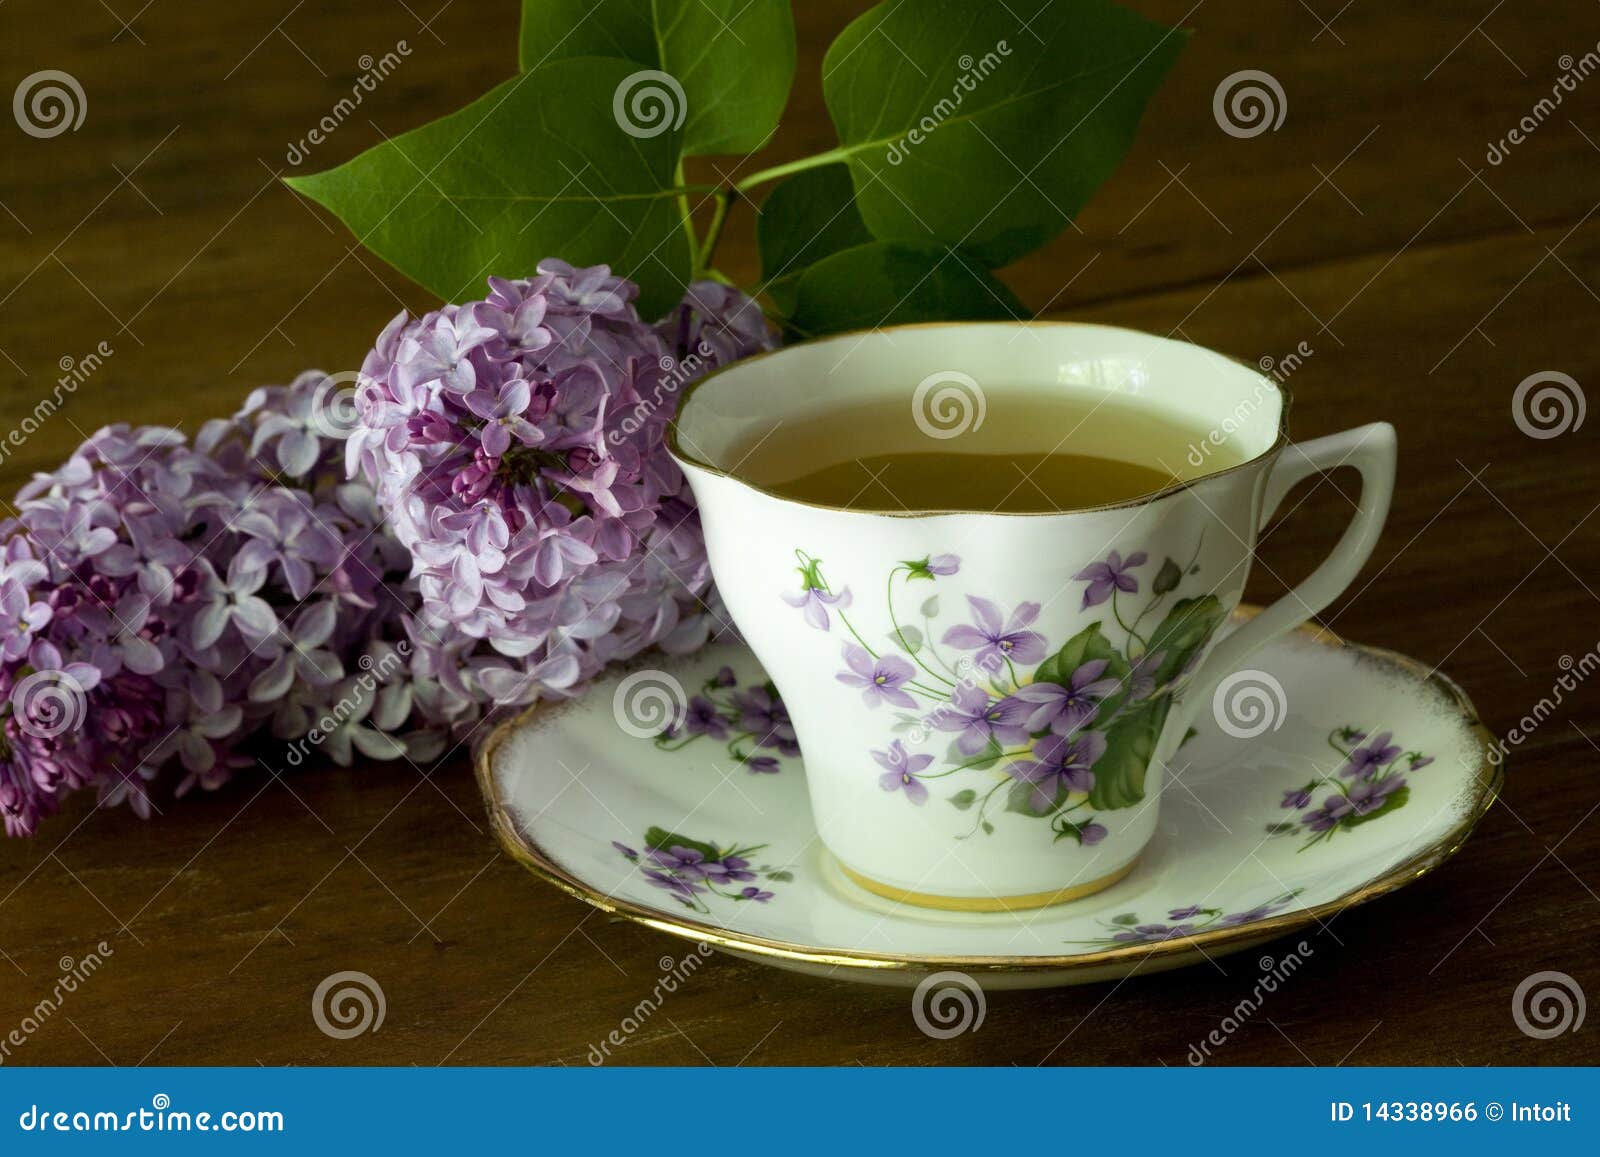 spring tea cup and lilacs